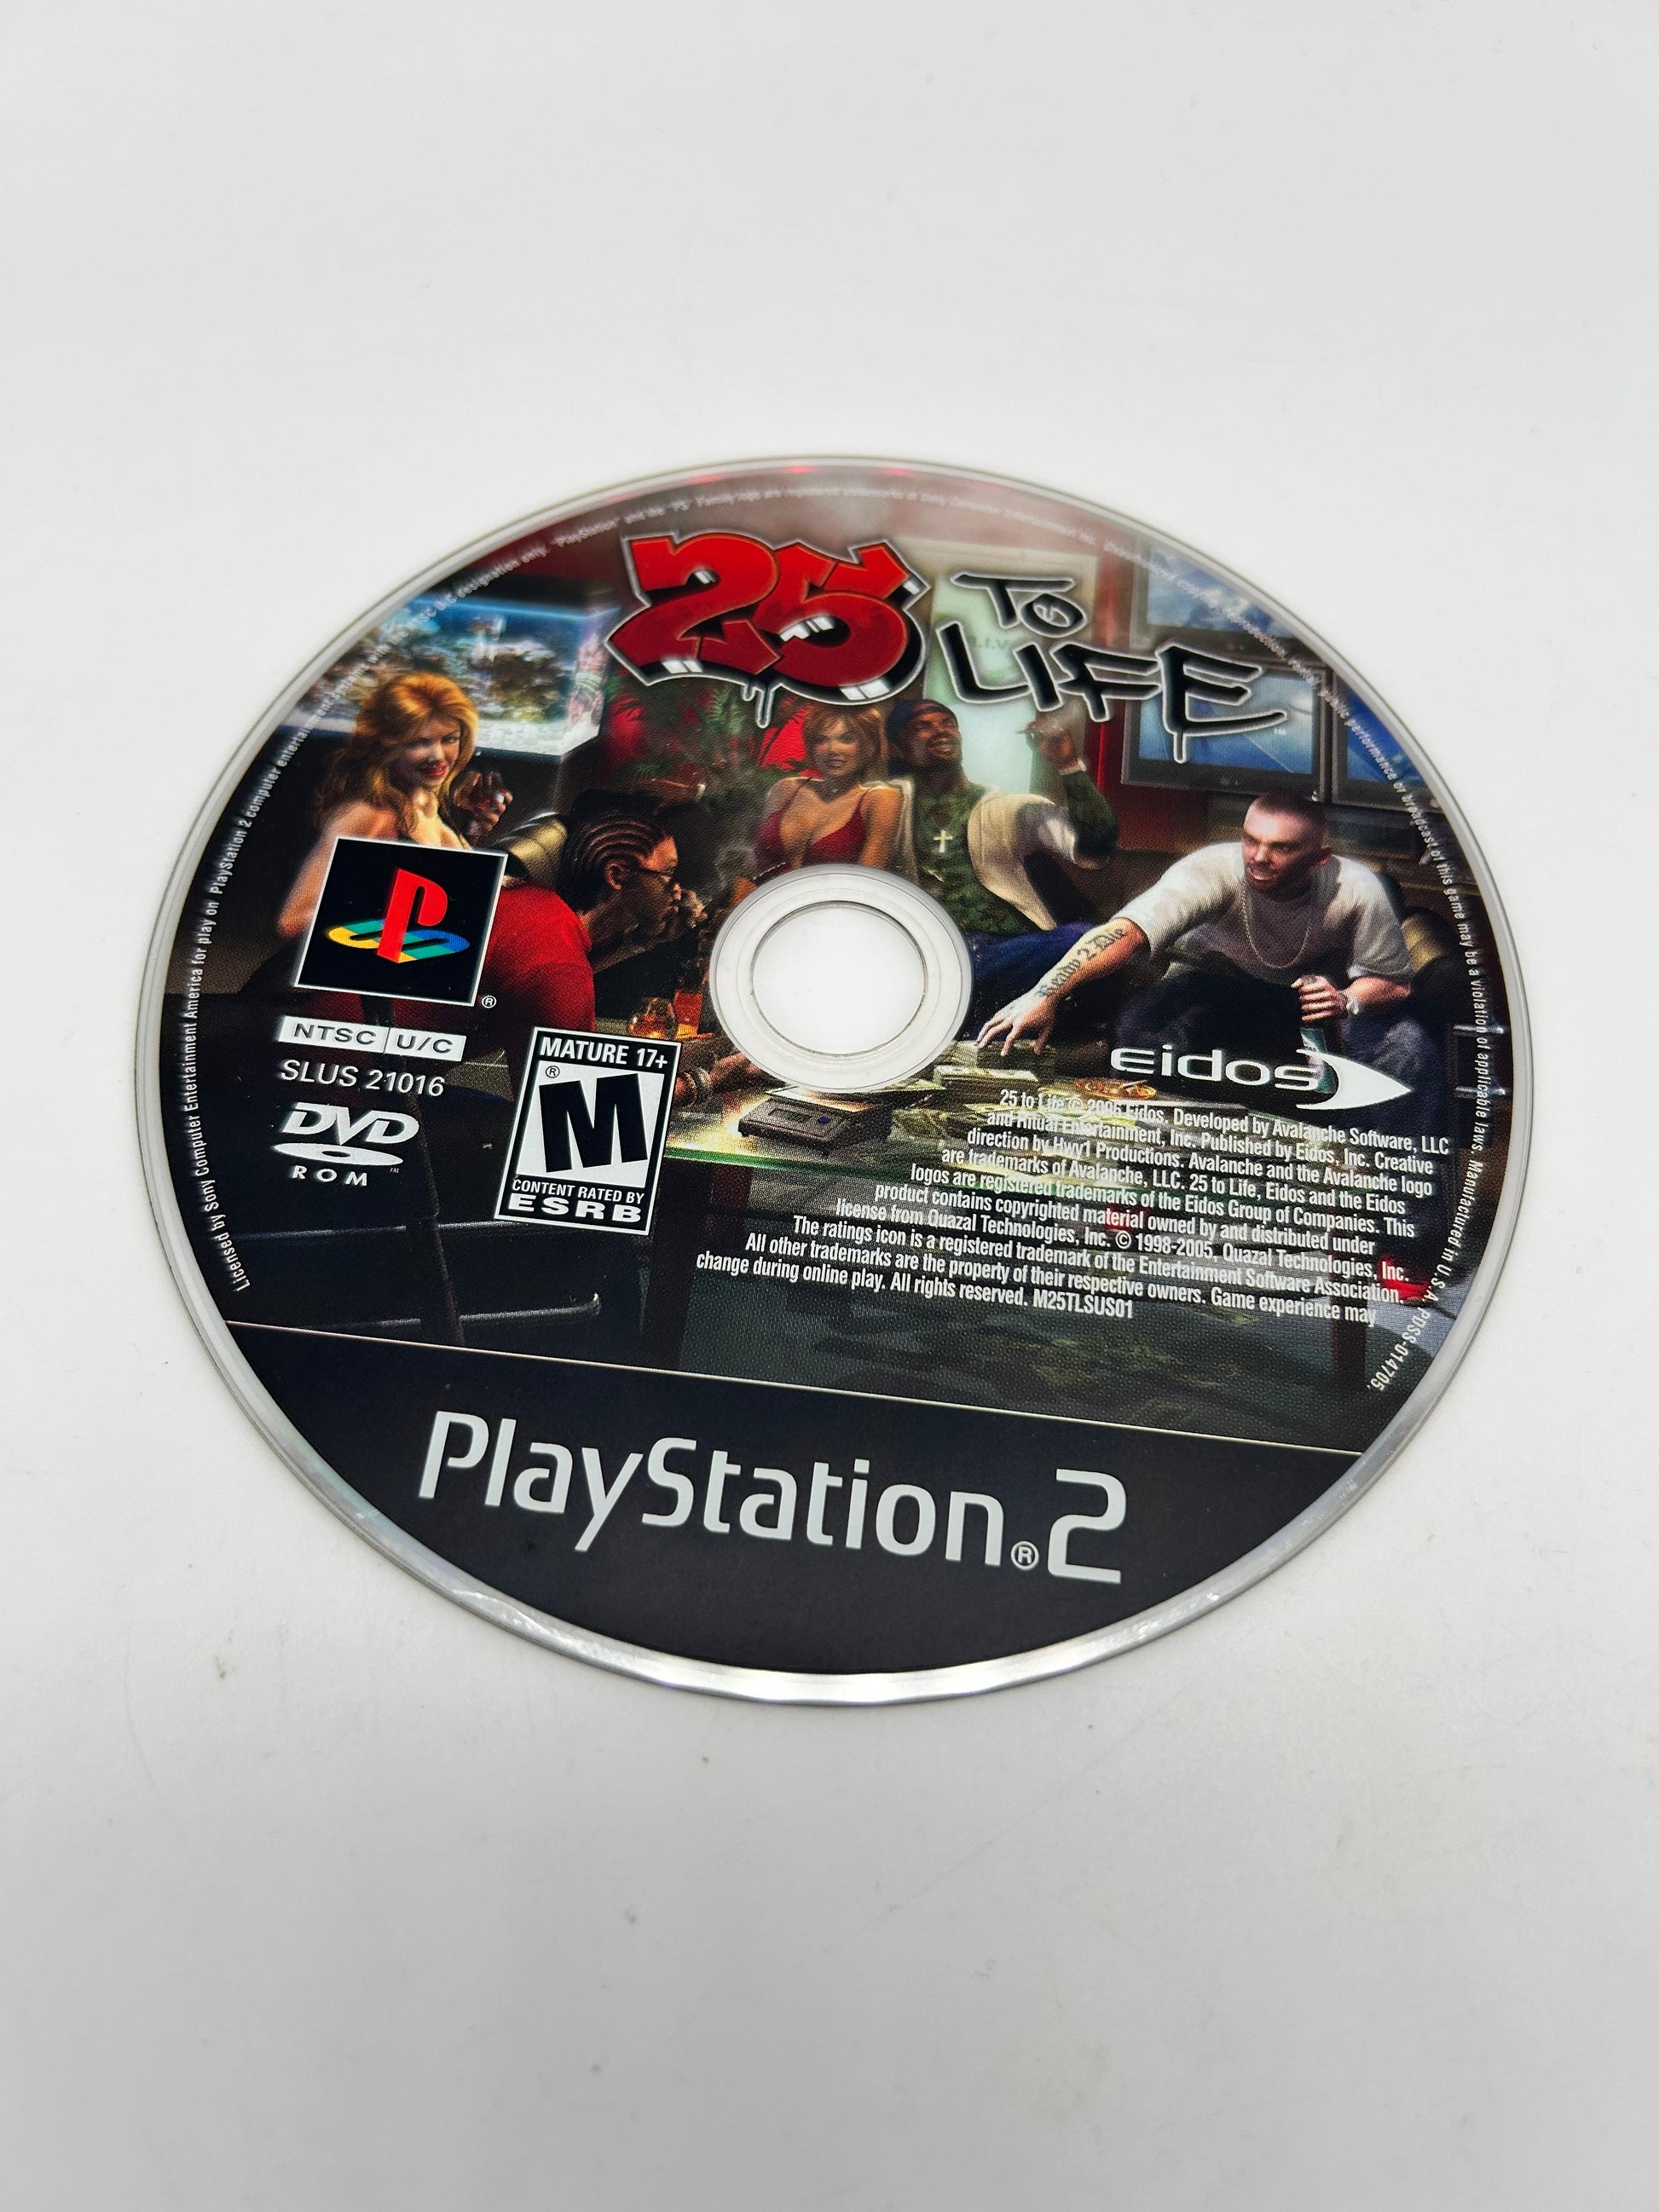 PiXEL-RETRO.COM : SONY PLAYSTATION 2 (PS2) GAME NTSC 25 TO LIFE